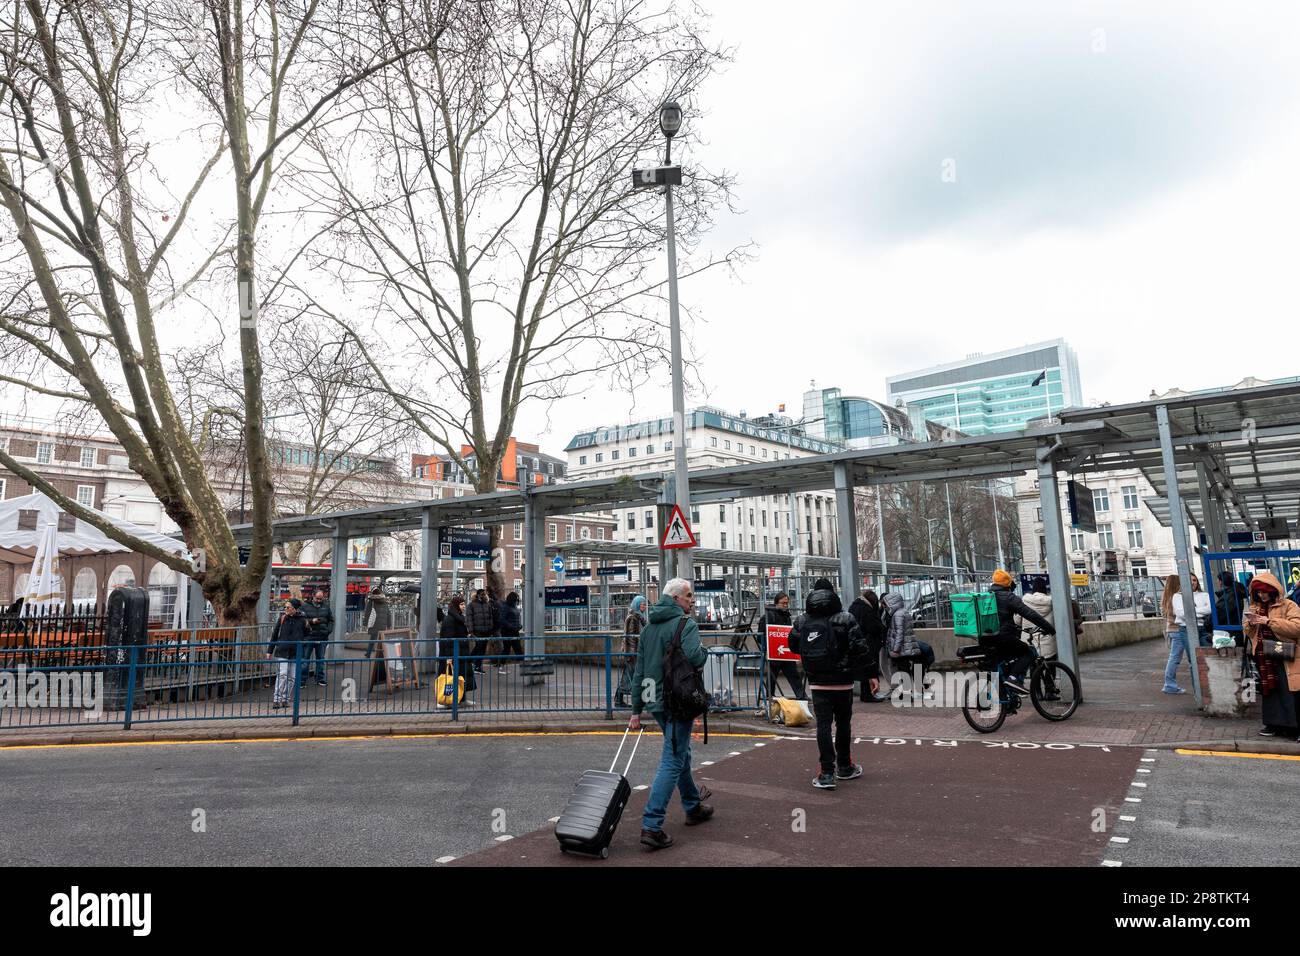 London, UK. 7th March, 2023. Members of the public pass around the former Euston Square Gardens West, where several mature trees have recently been felled for the HS2 high-speed rail link. Euston is an area of London with few green spaces and where EU air quality standards have been regularly infringed. Credit: Mark Kerrison/Alamy Live News Stock Photo